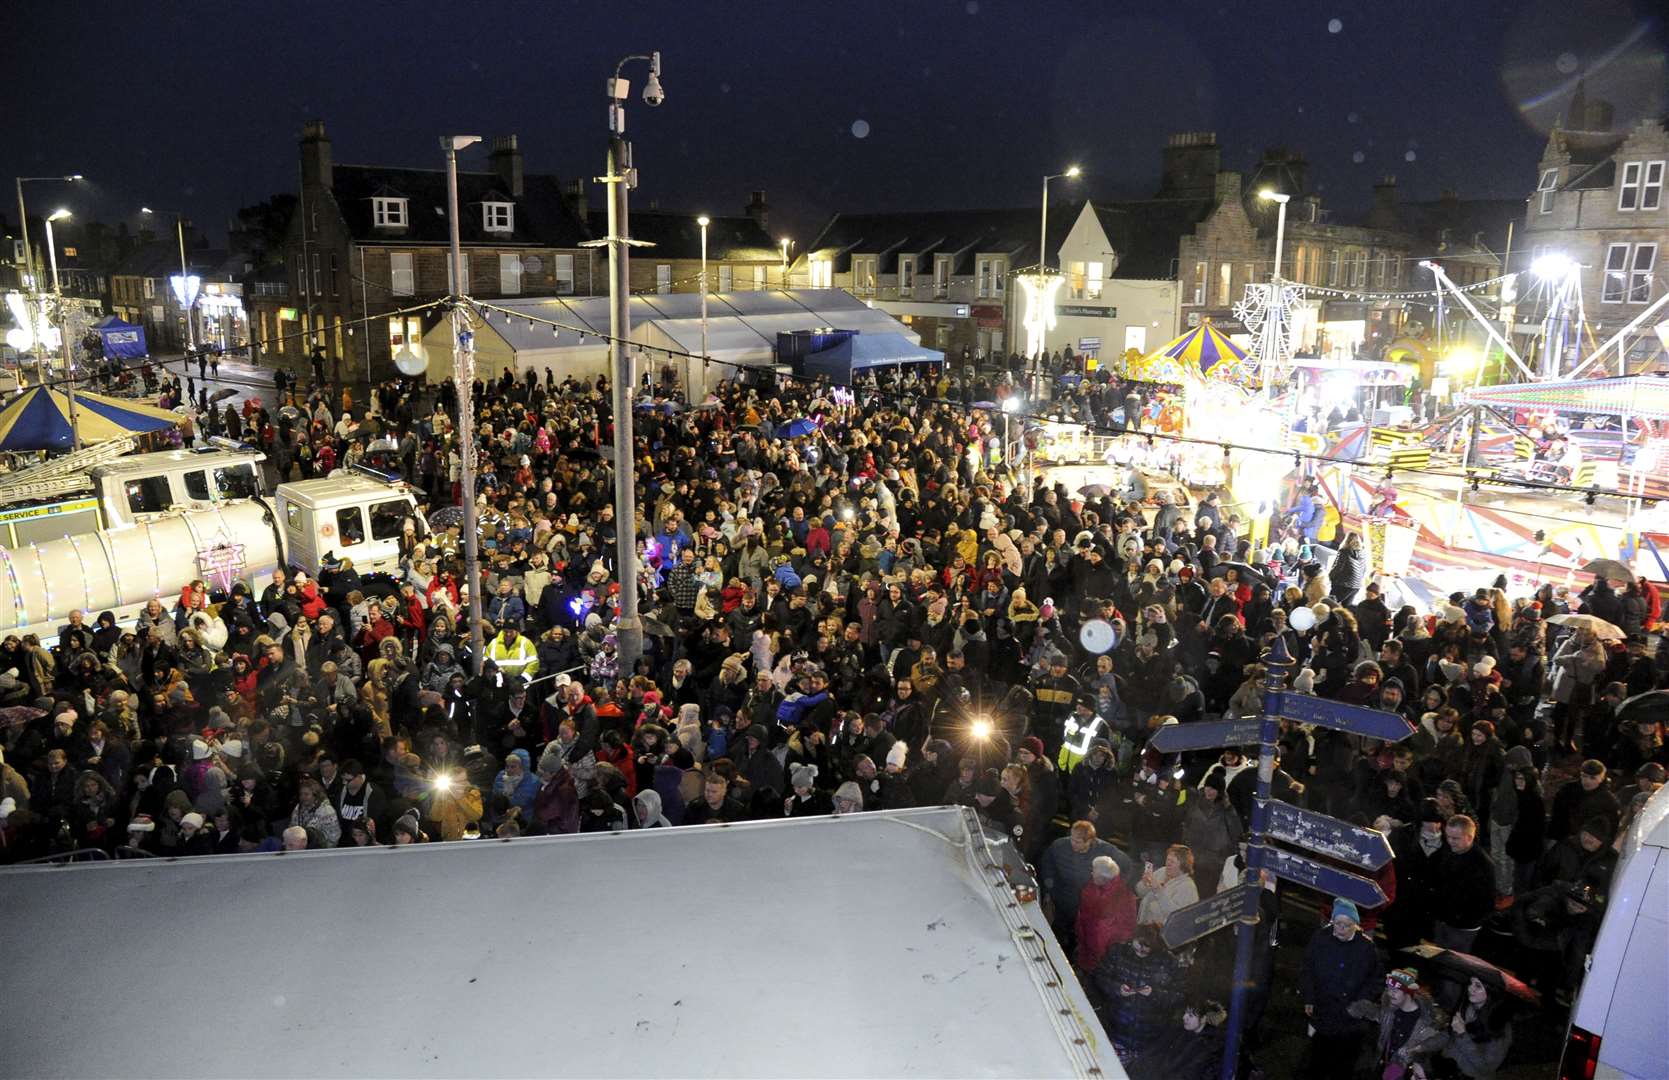 A packed Cluny Square during the Christmas lights switch on.